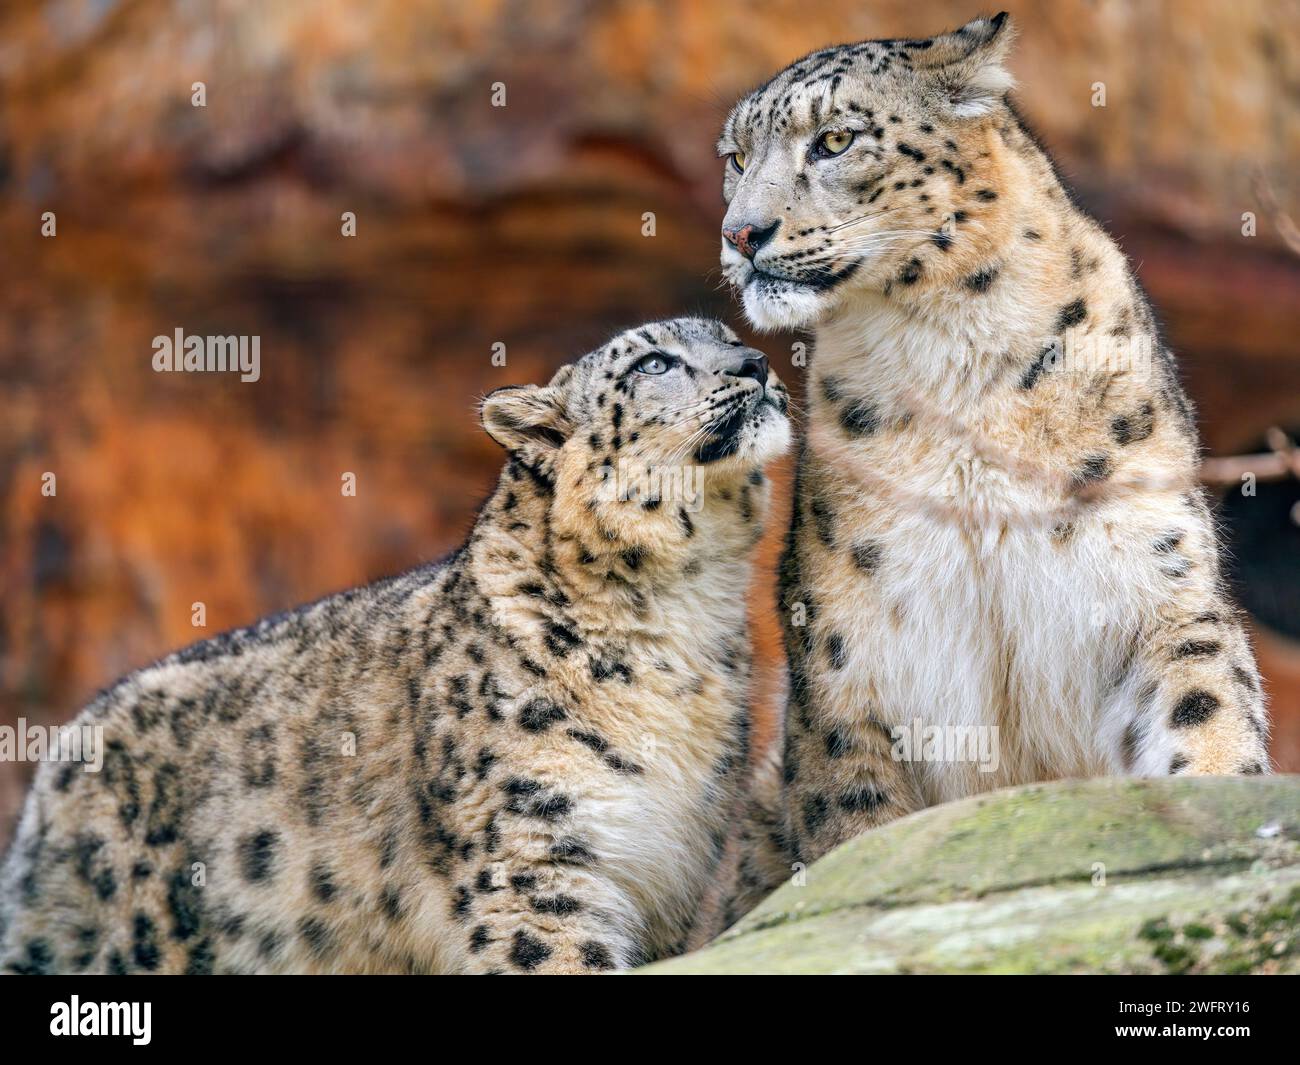 One of the cub together with his dad Mekong. Nice to see that they are still good friend! Stock Photo